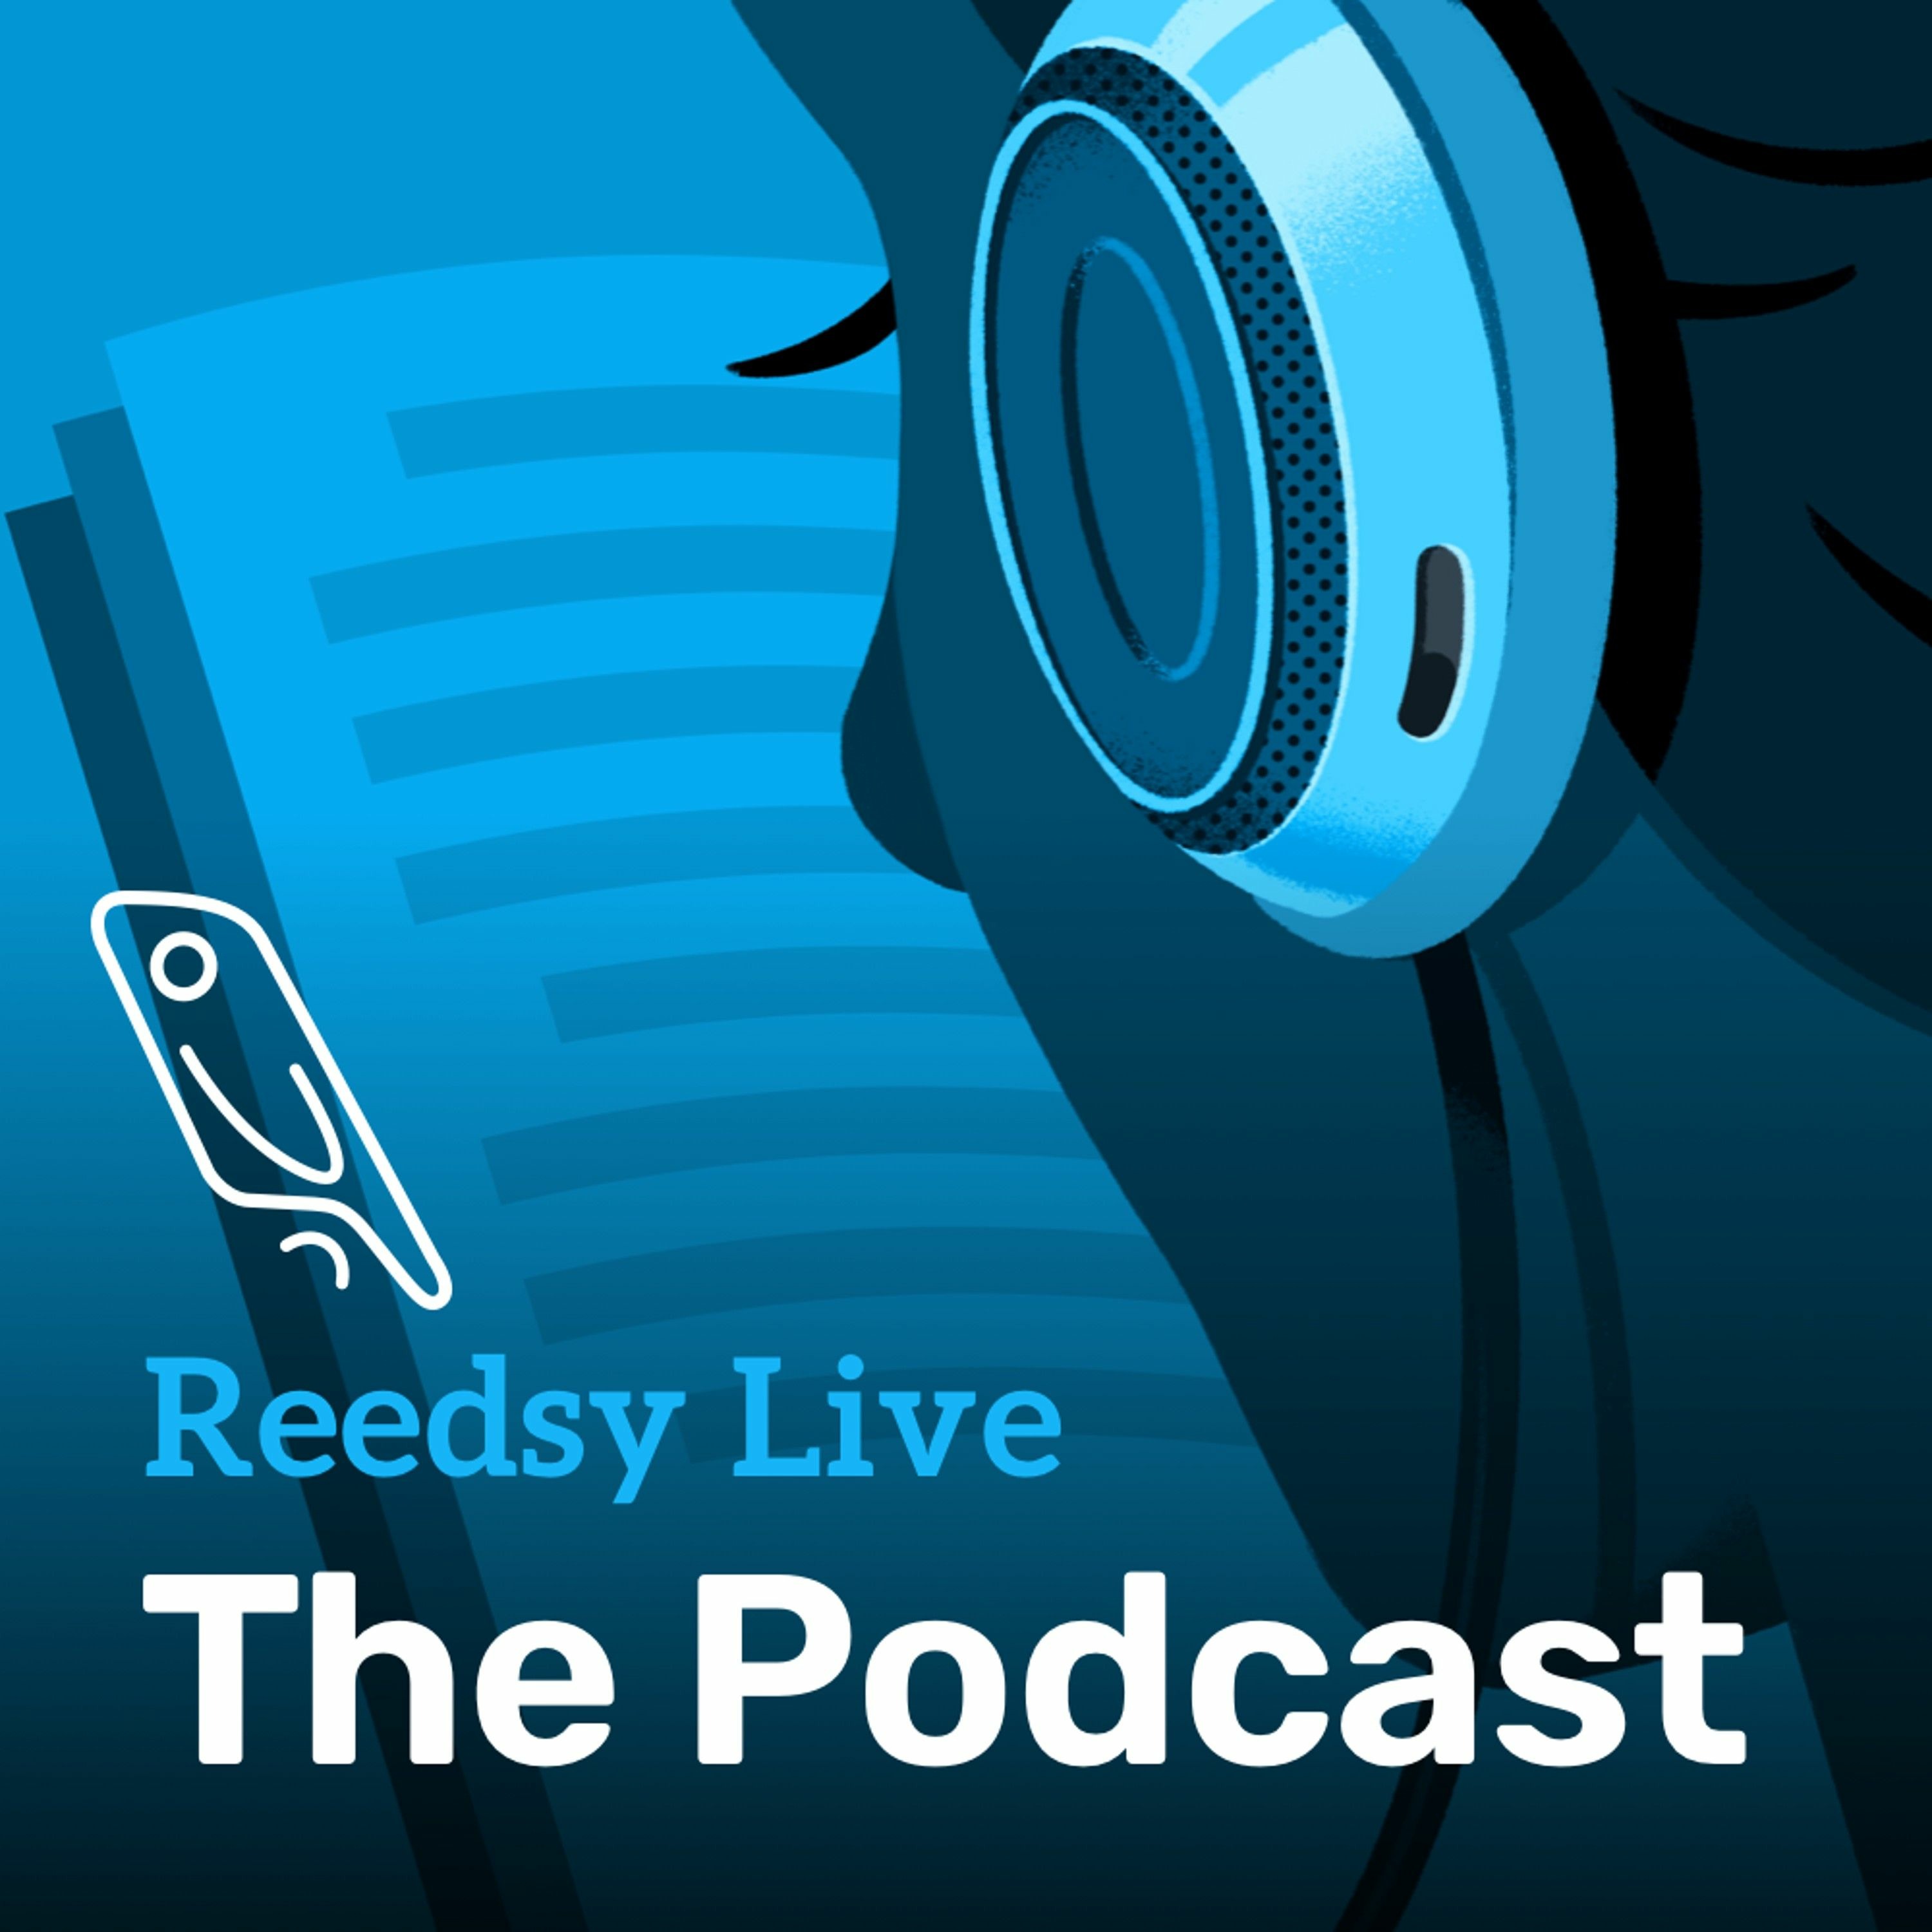 Reedsy Live: Unleash Your Inner Editor (and Kill Your Darlings) with SJ Watson